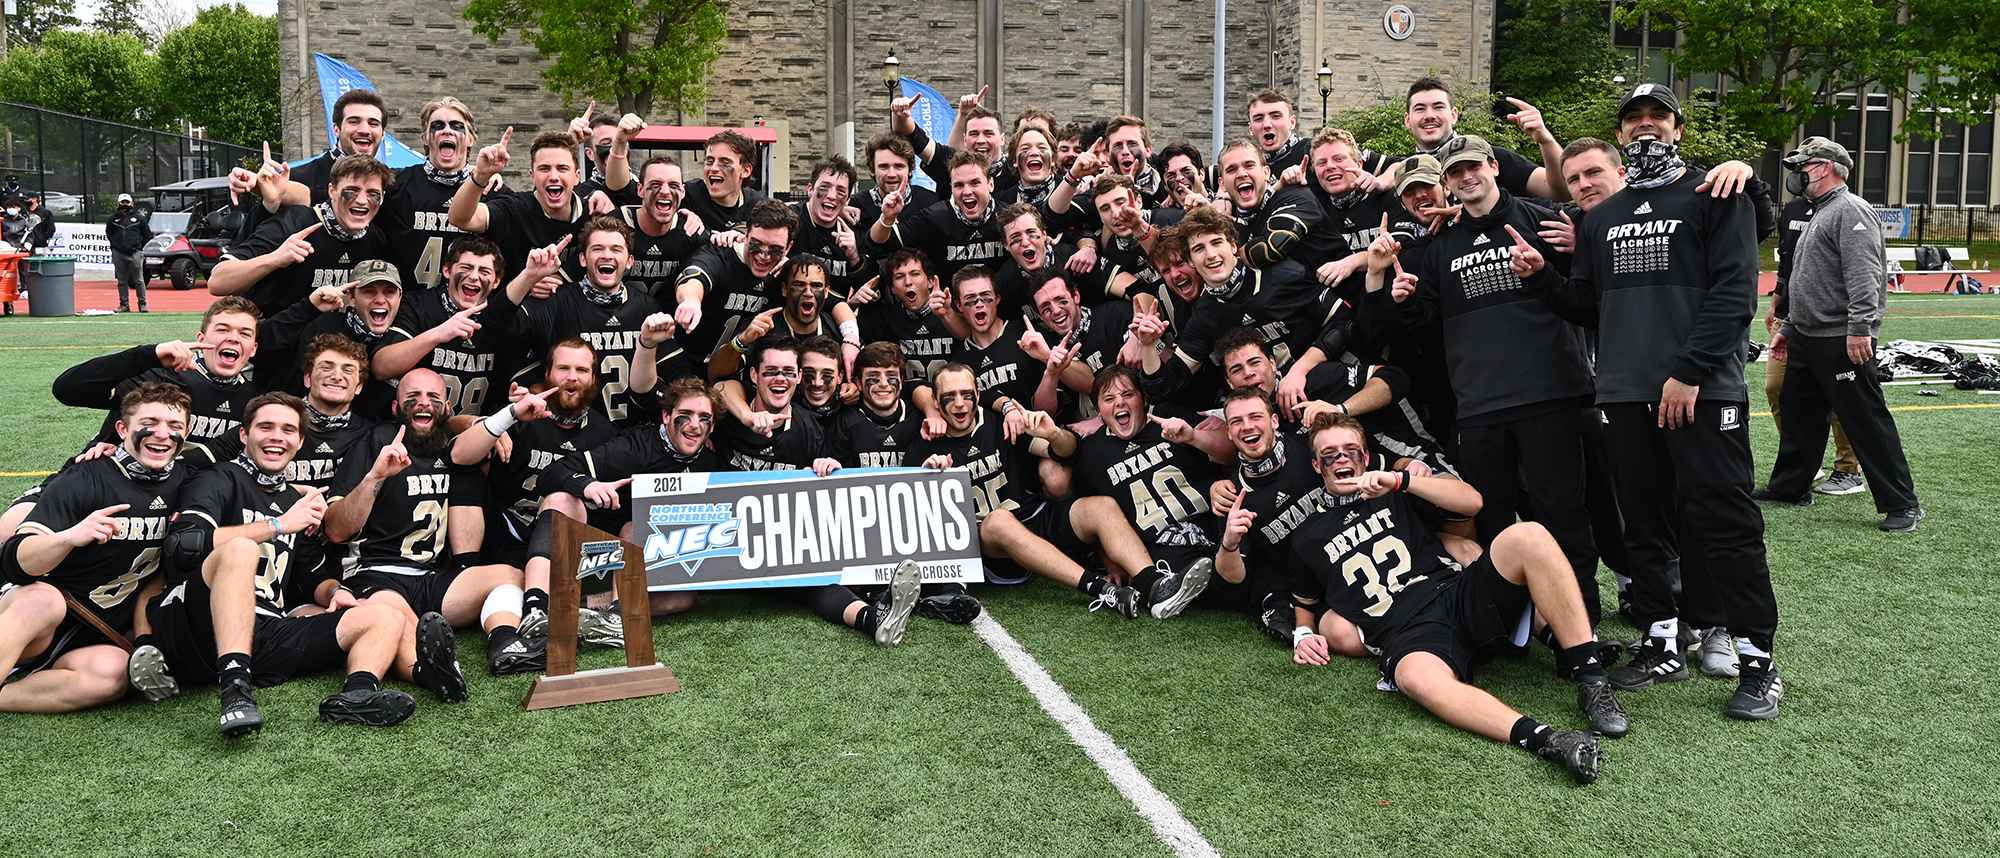 Bryant wins NEC Championship Saturday in Philly